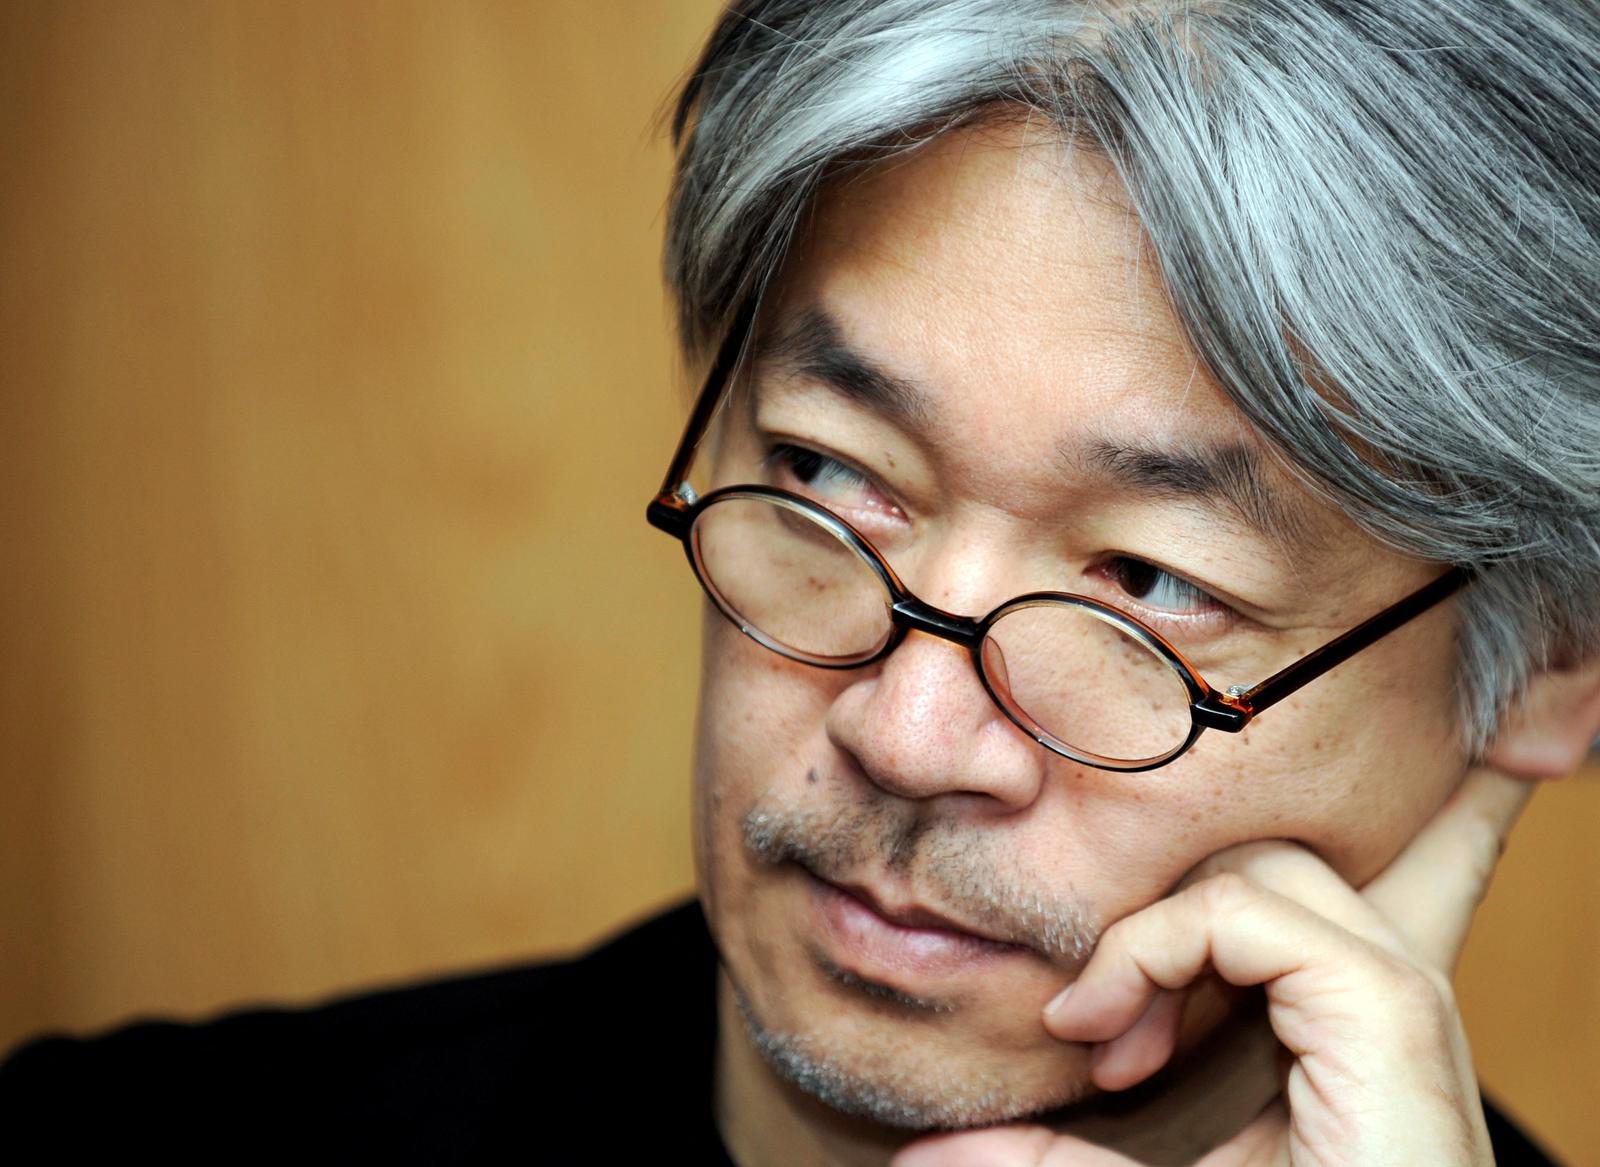 FILE PHOTO: Ryuichi Sakamoto of Japanese electropop band "Yellow Magic Orchestra" attends a news conference in Gijon, northern Spain, June 18, 2008. REUTERS/Eloy Alonso/File Photo Photo: ELOY ALONSO/REUTERS